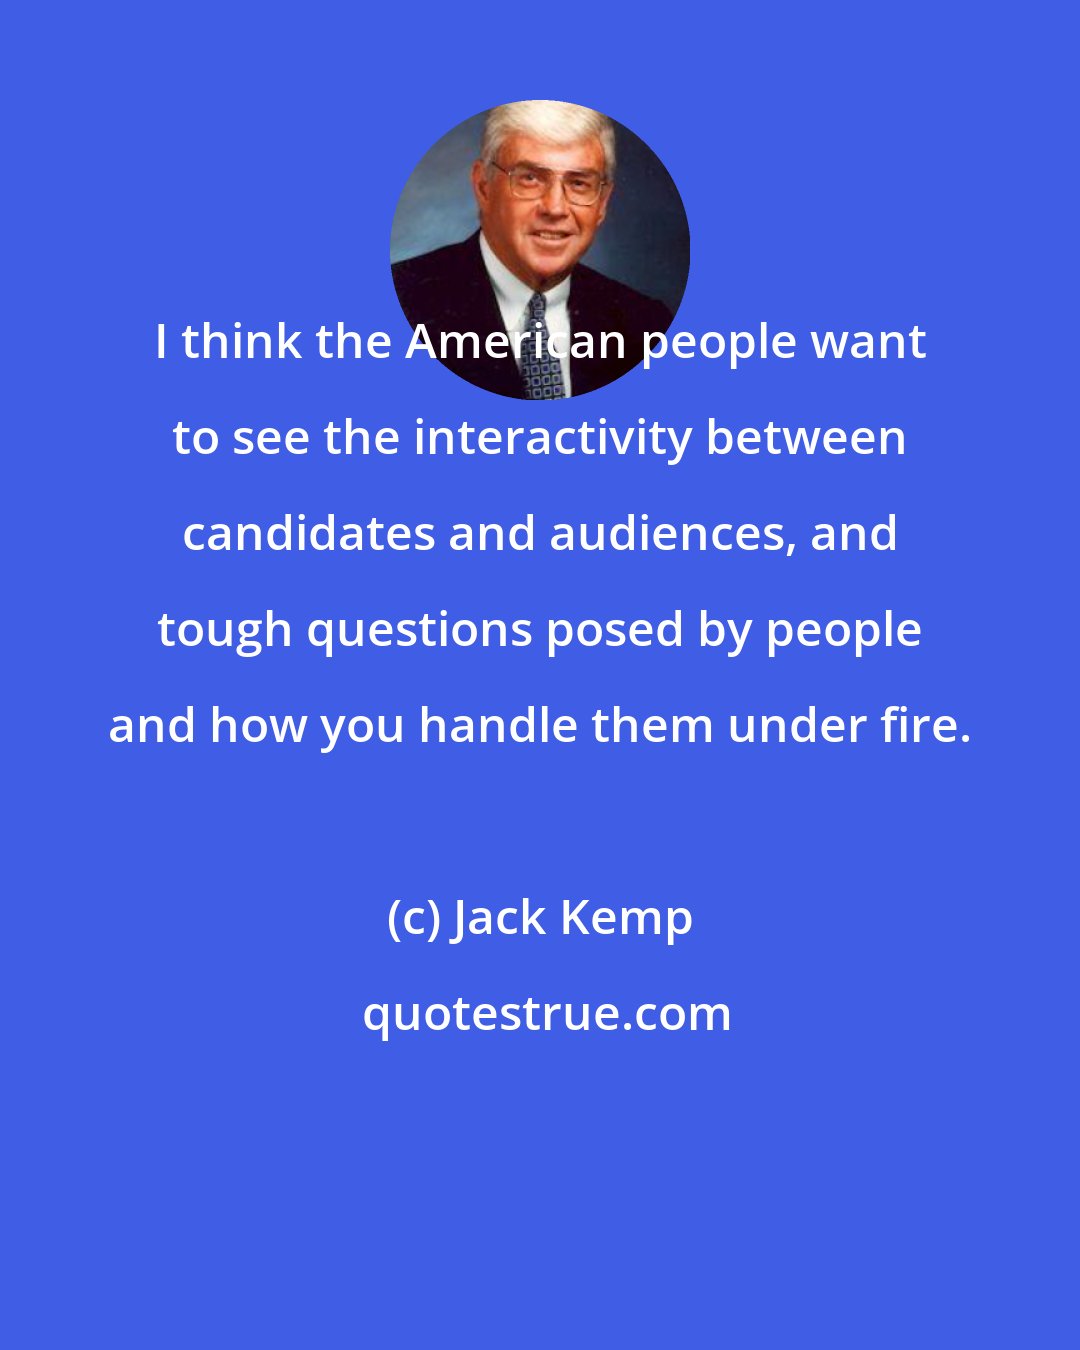 Jack Kemp: I think the American people want to see the interactivity between candidates and audiences, and tough questions posed by people and how you handle them under fire.